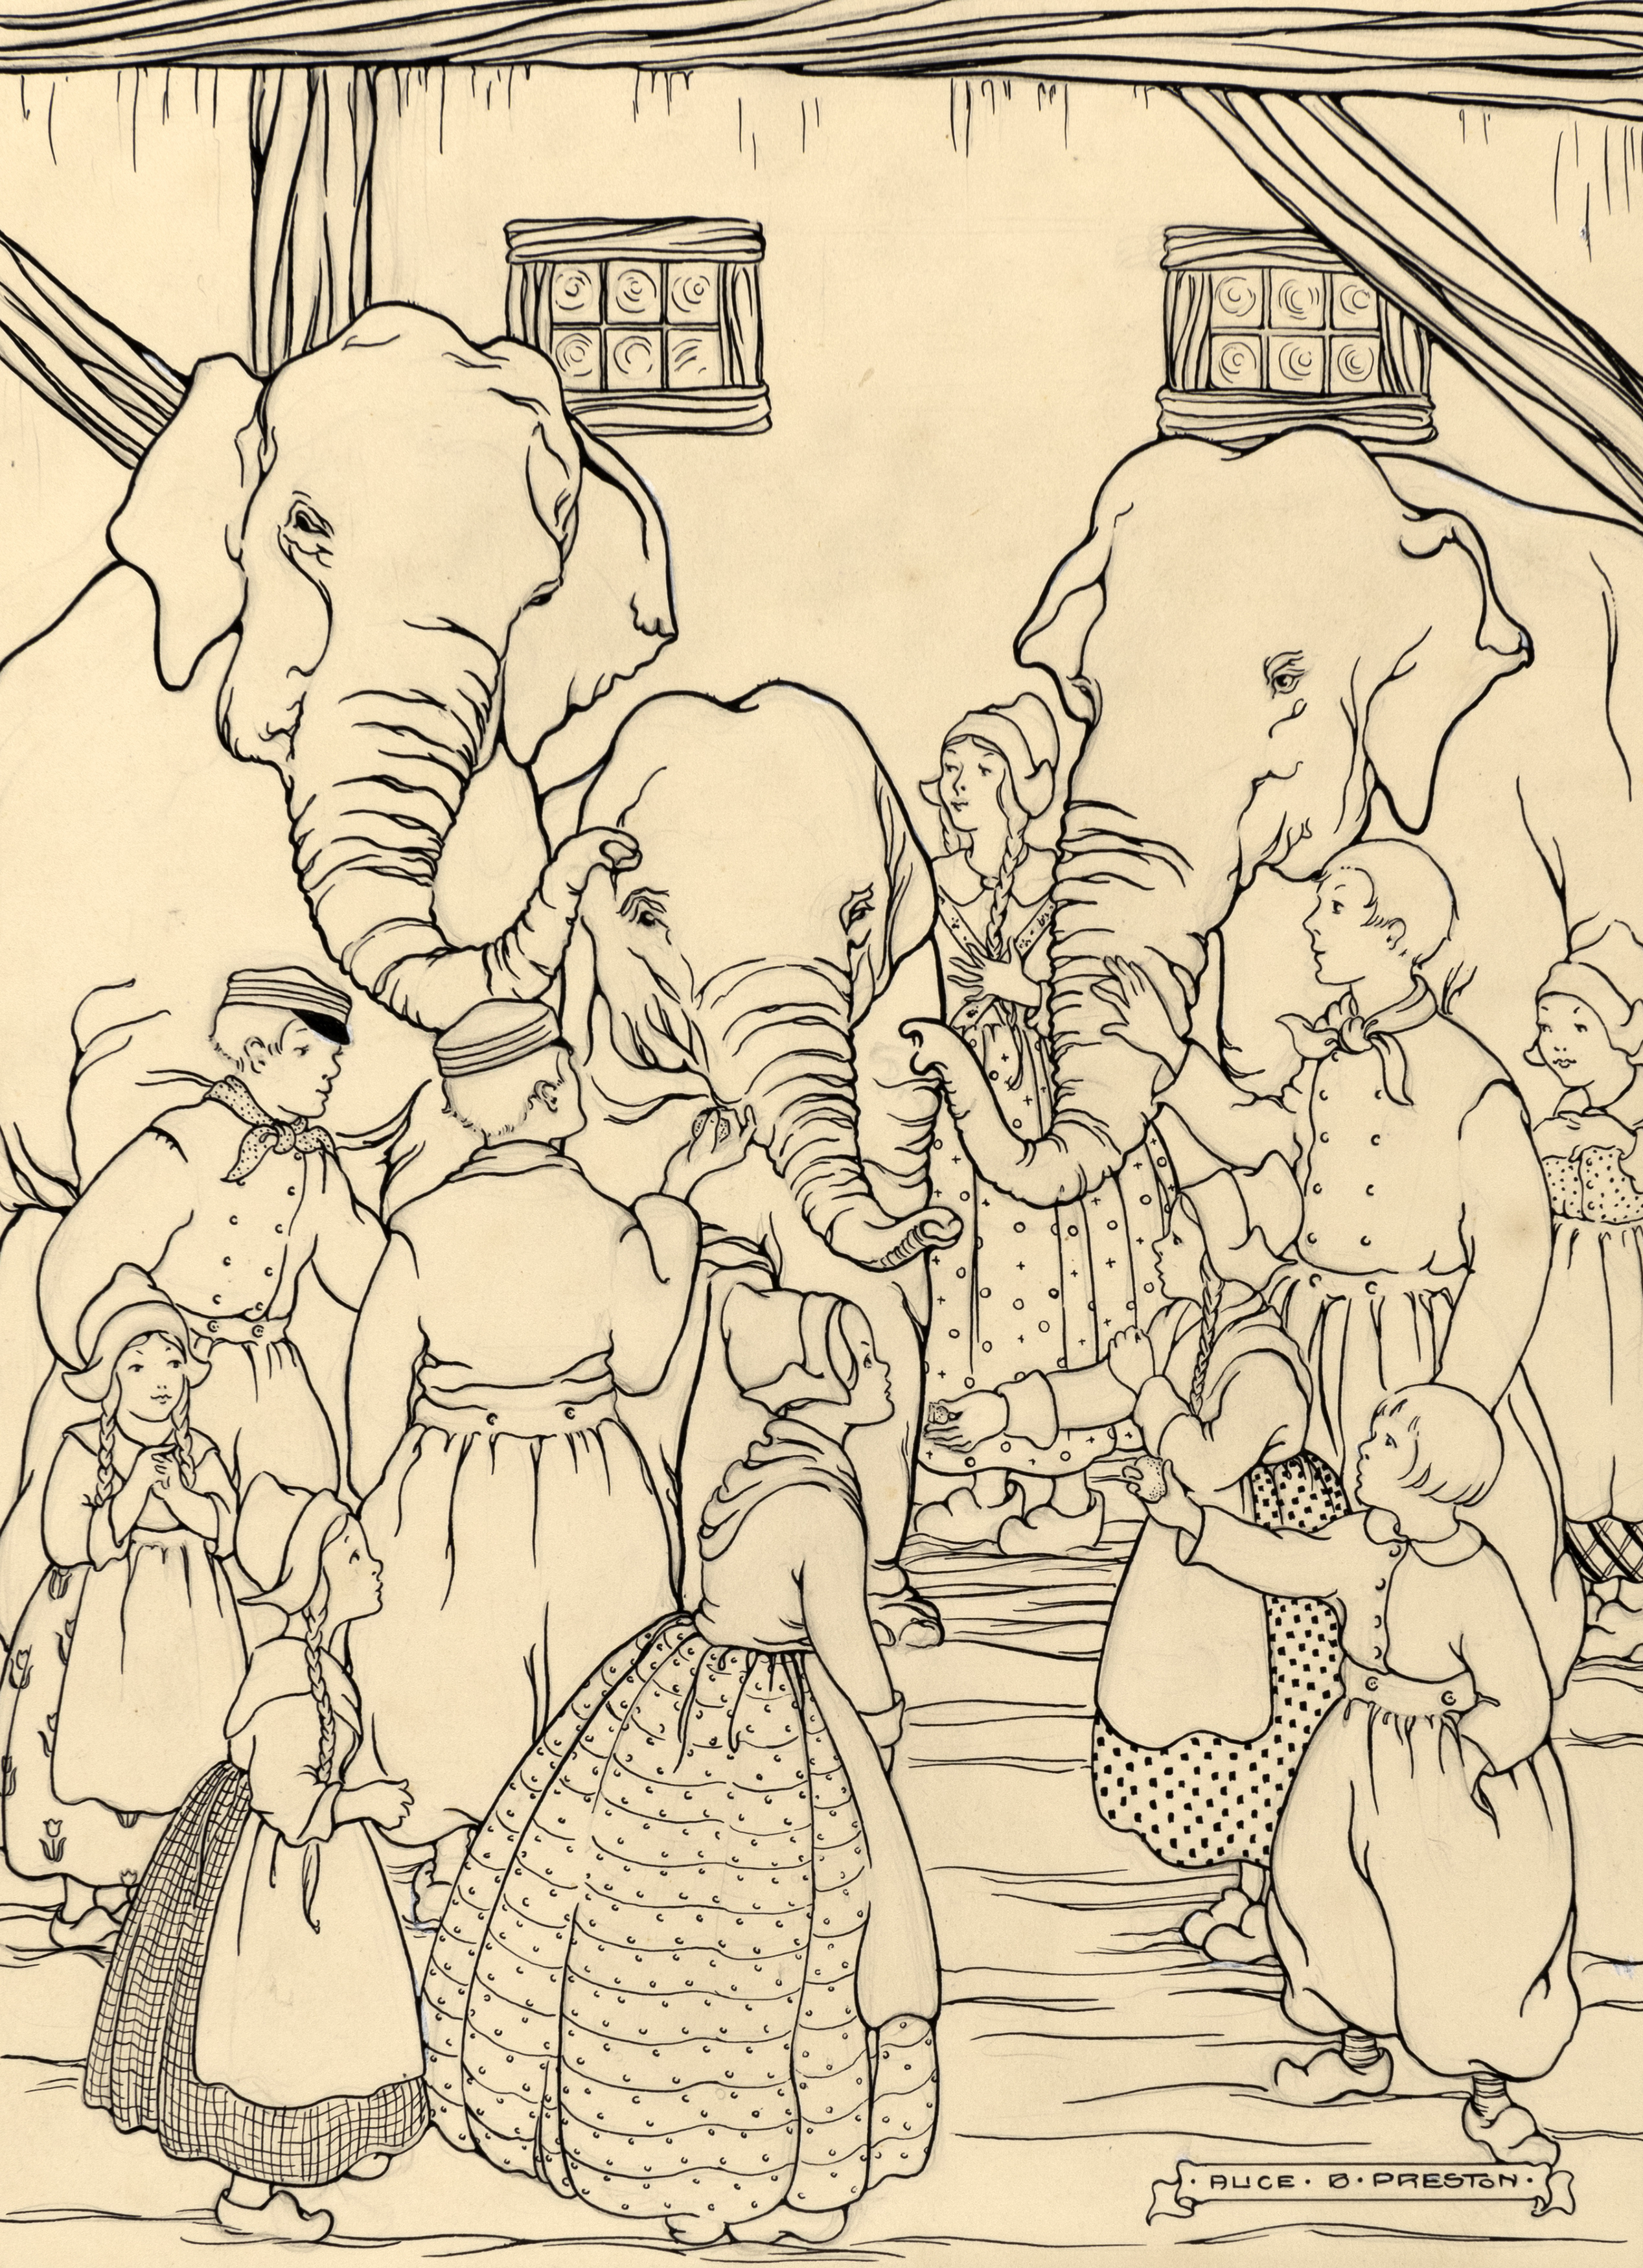 Illustration of elephants and people.